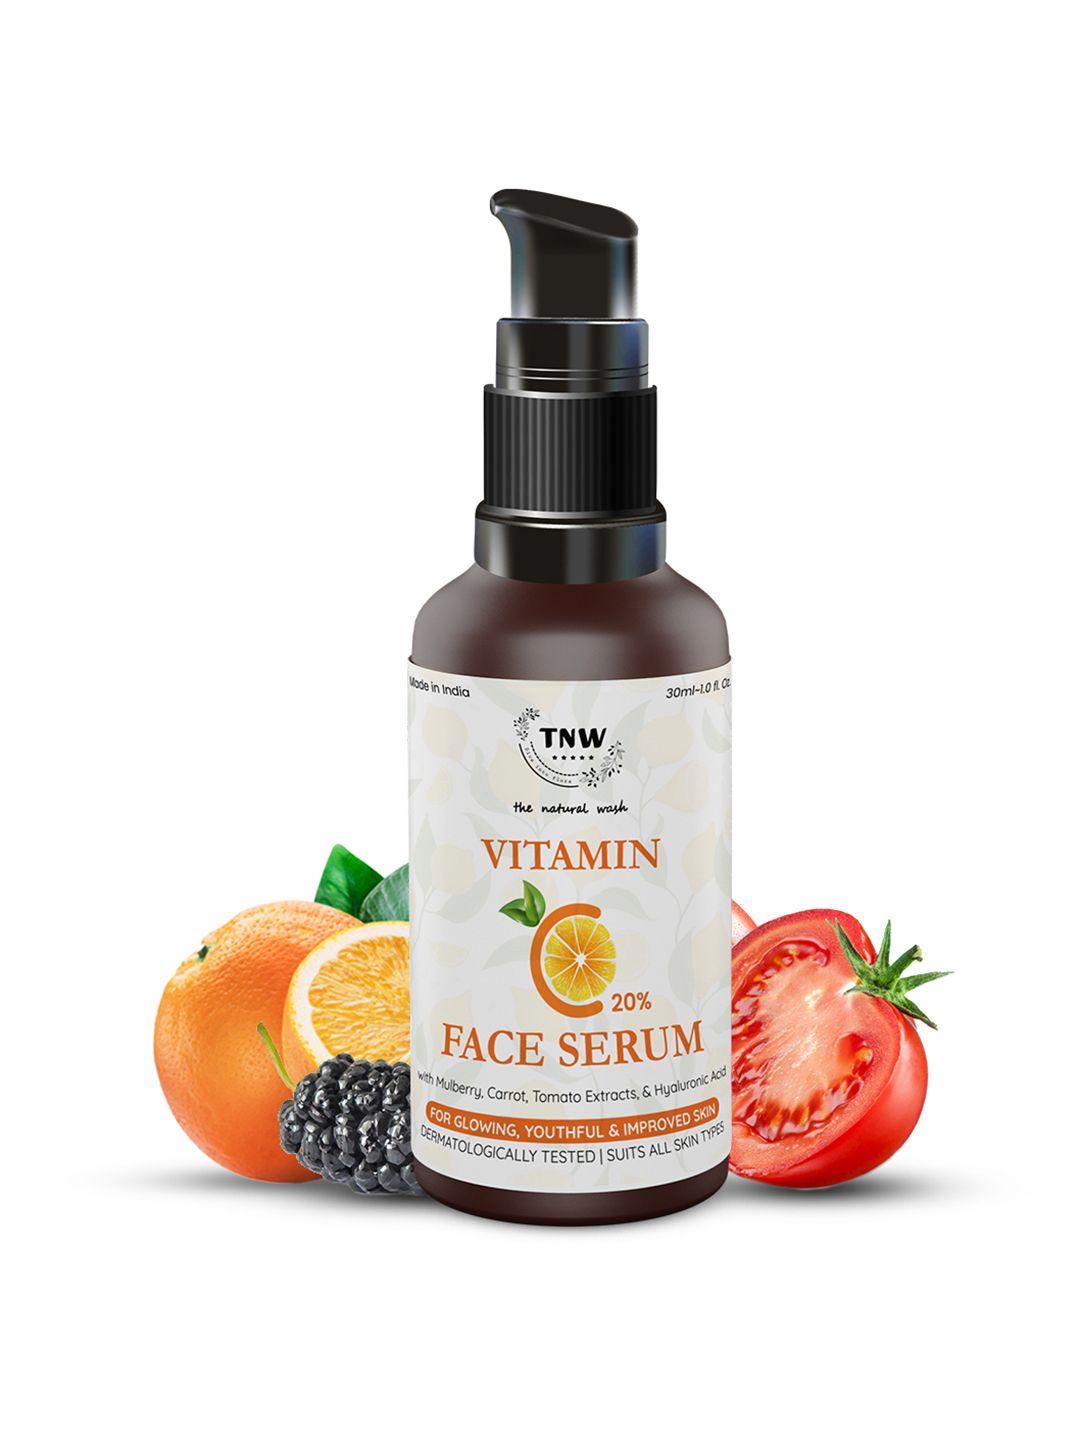 tnw the natural wash vitamin c face serum for glowing youthful & improved skin - 30ml